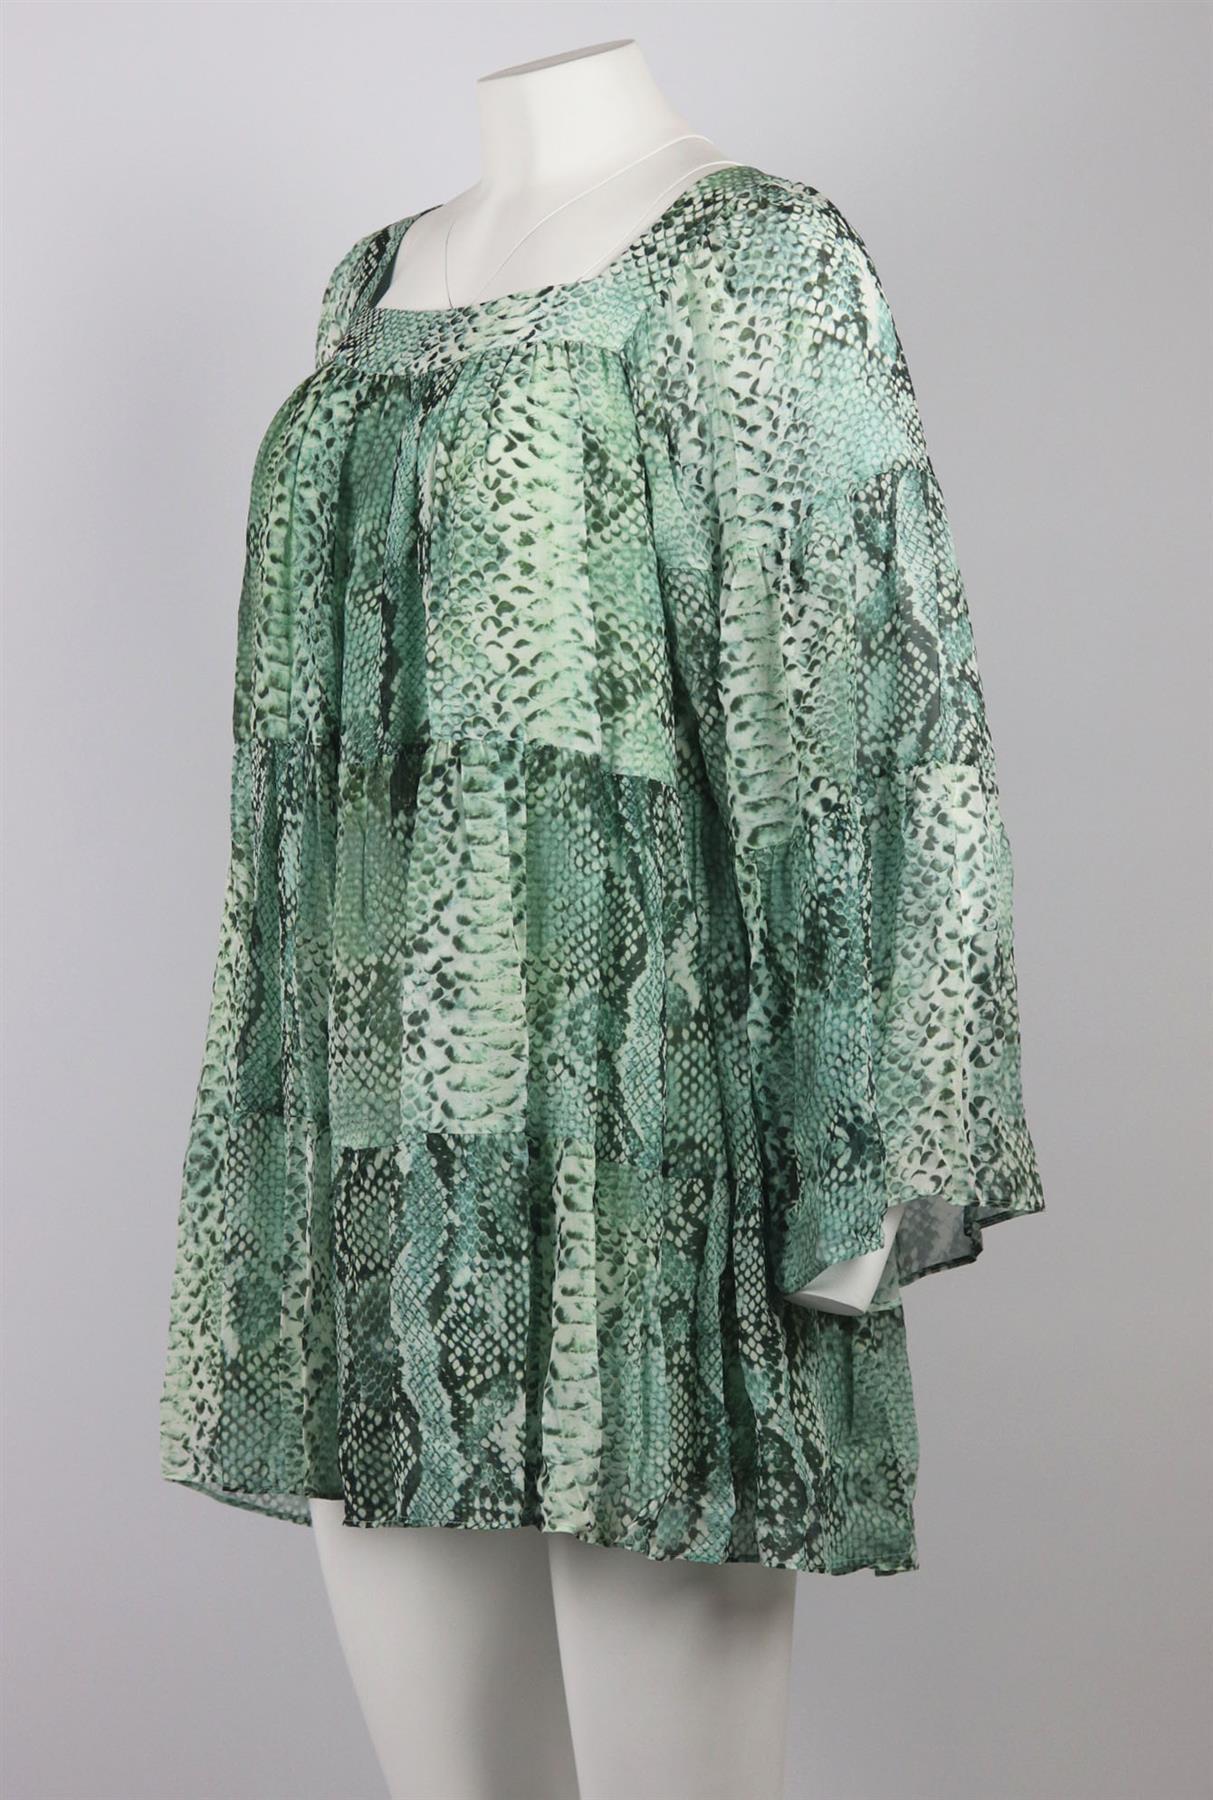 Pierre Balmain's snake-print silk-chiffon dress is at once modest and feminine, defined by a ruched-tiered silhouette and gently puffed sleeves that falls gently over your silhouette. Tonal-green and black silk-chiffon. Slips on. 100% Silk.Size: FR